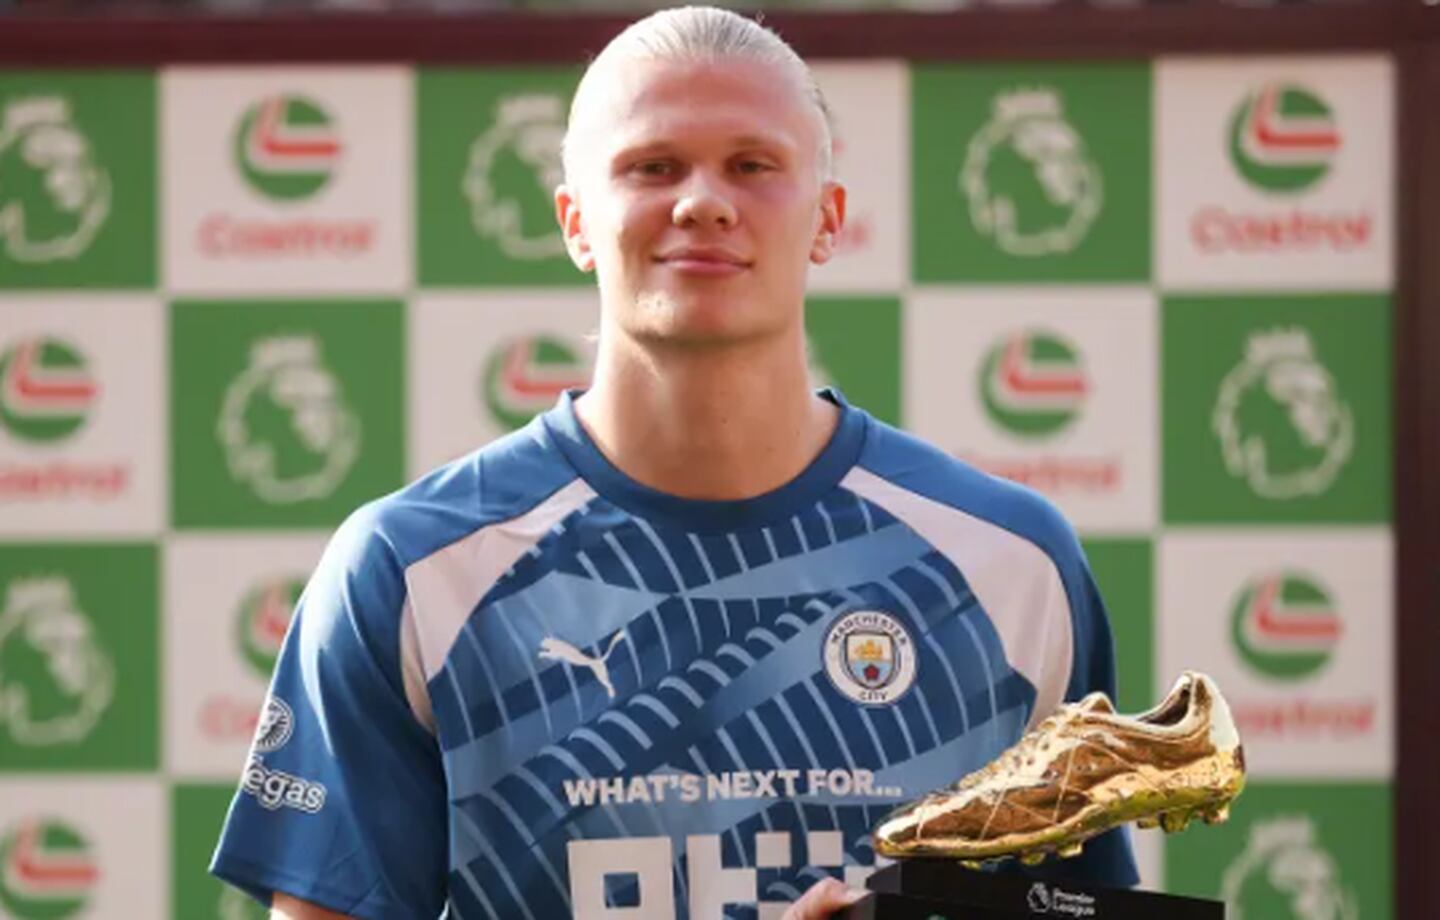  Erling Haaland poses with the golden boot after winning the Premier League Golden Boot award for the 2022-23 season.